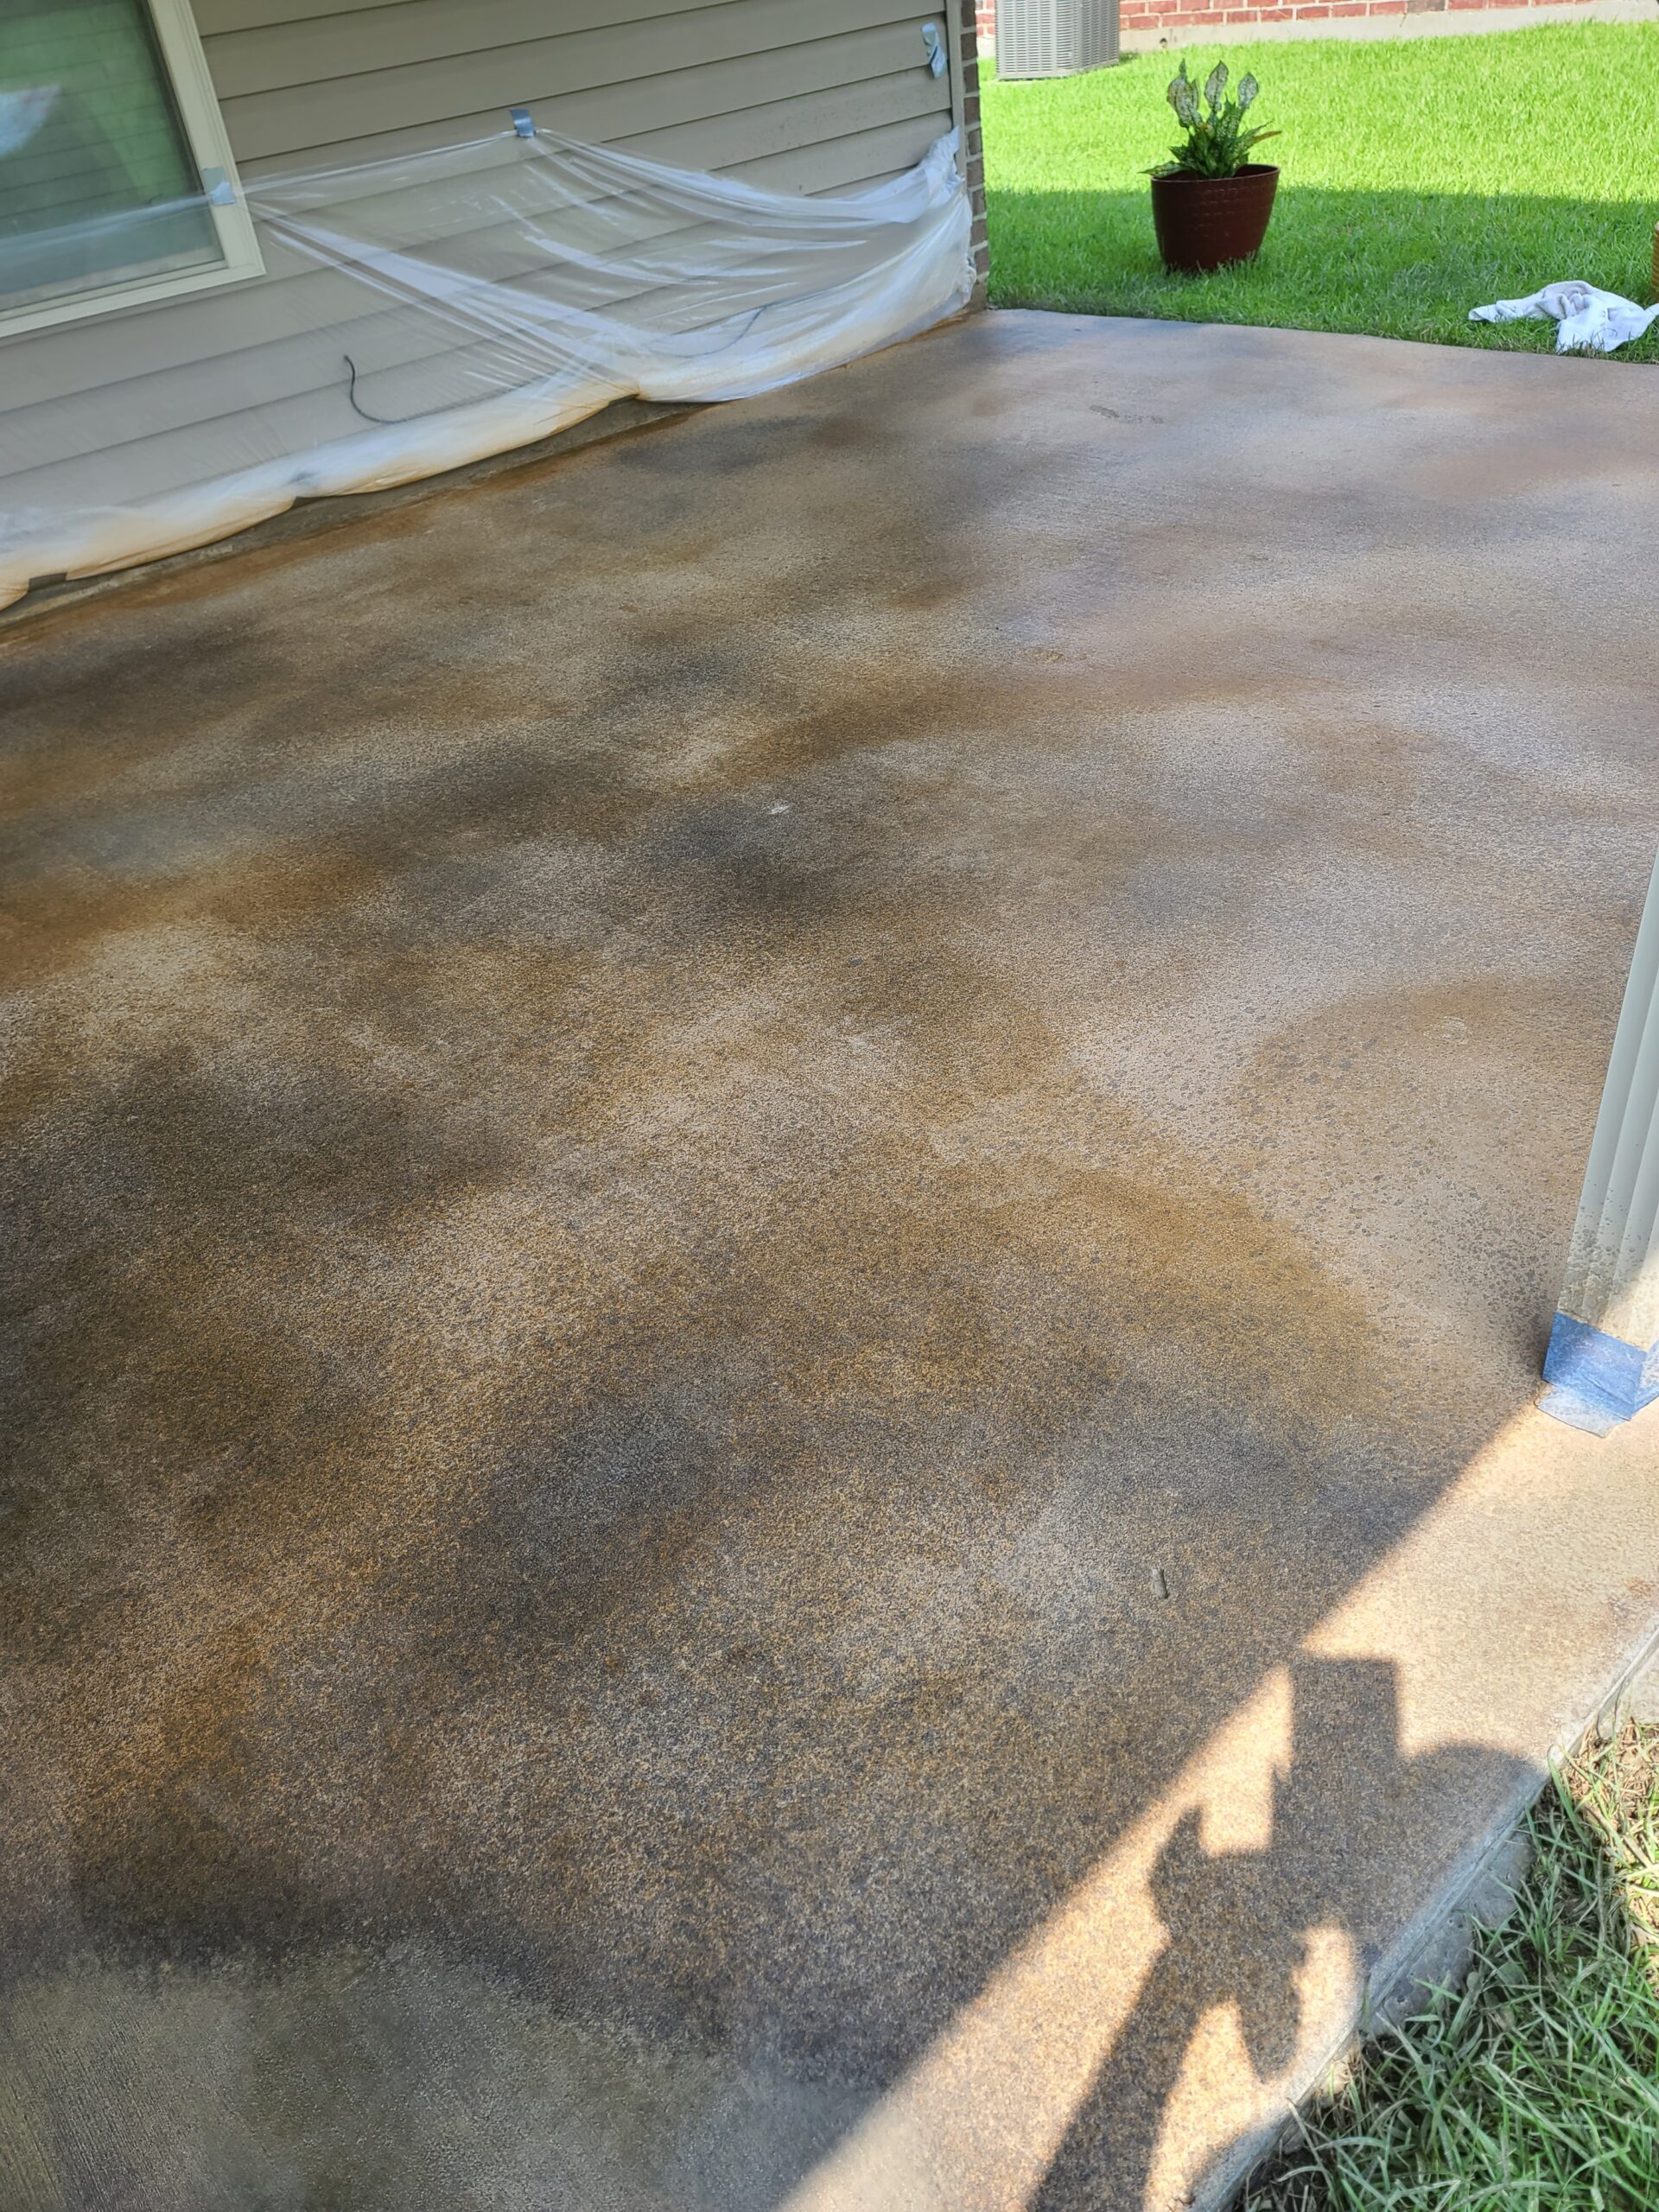 Concrete Patio Stained with Dye